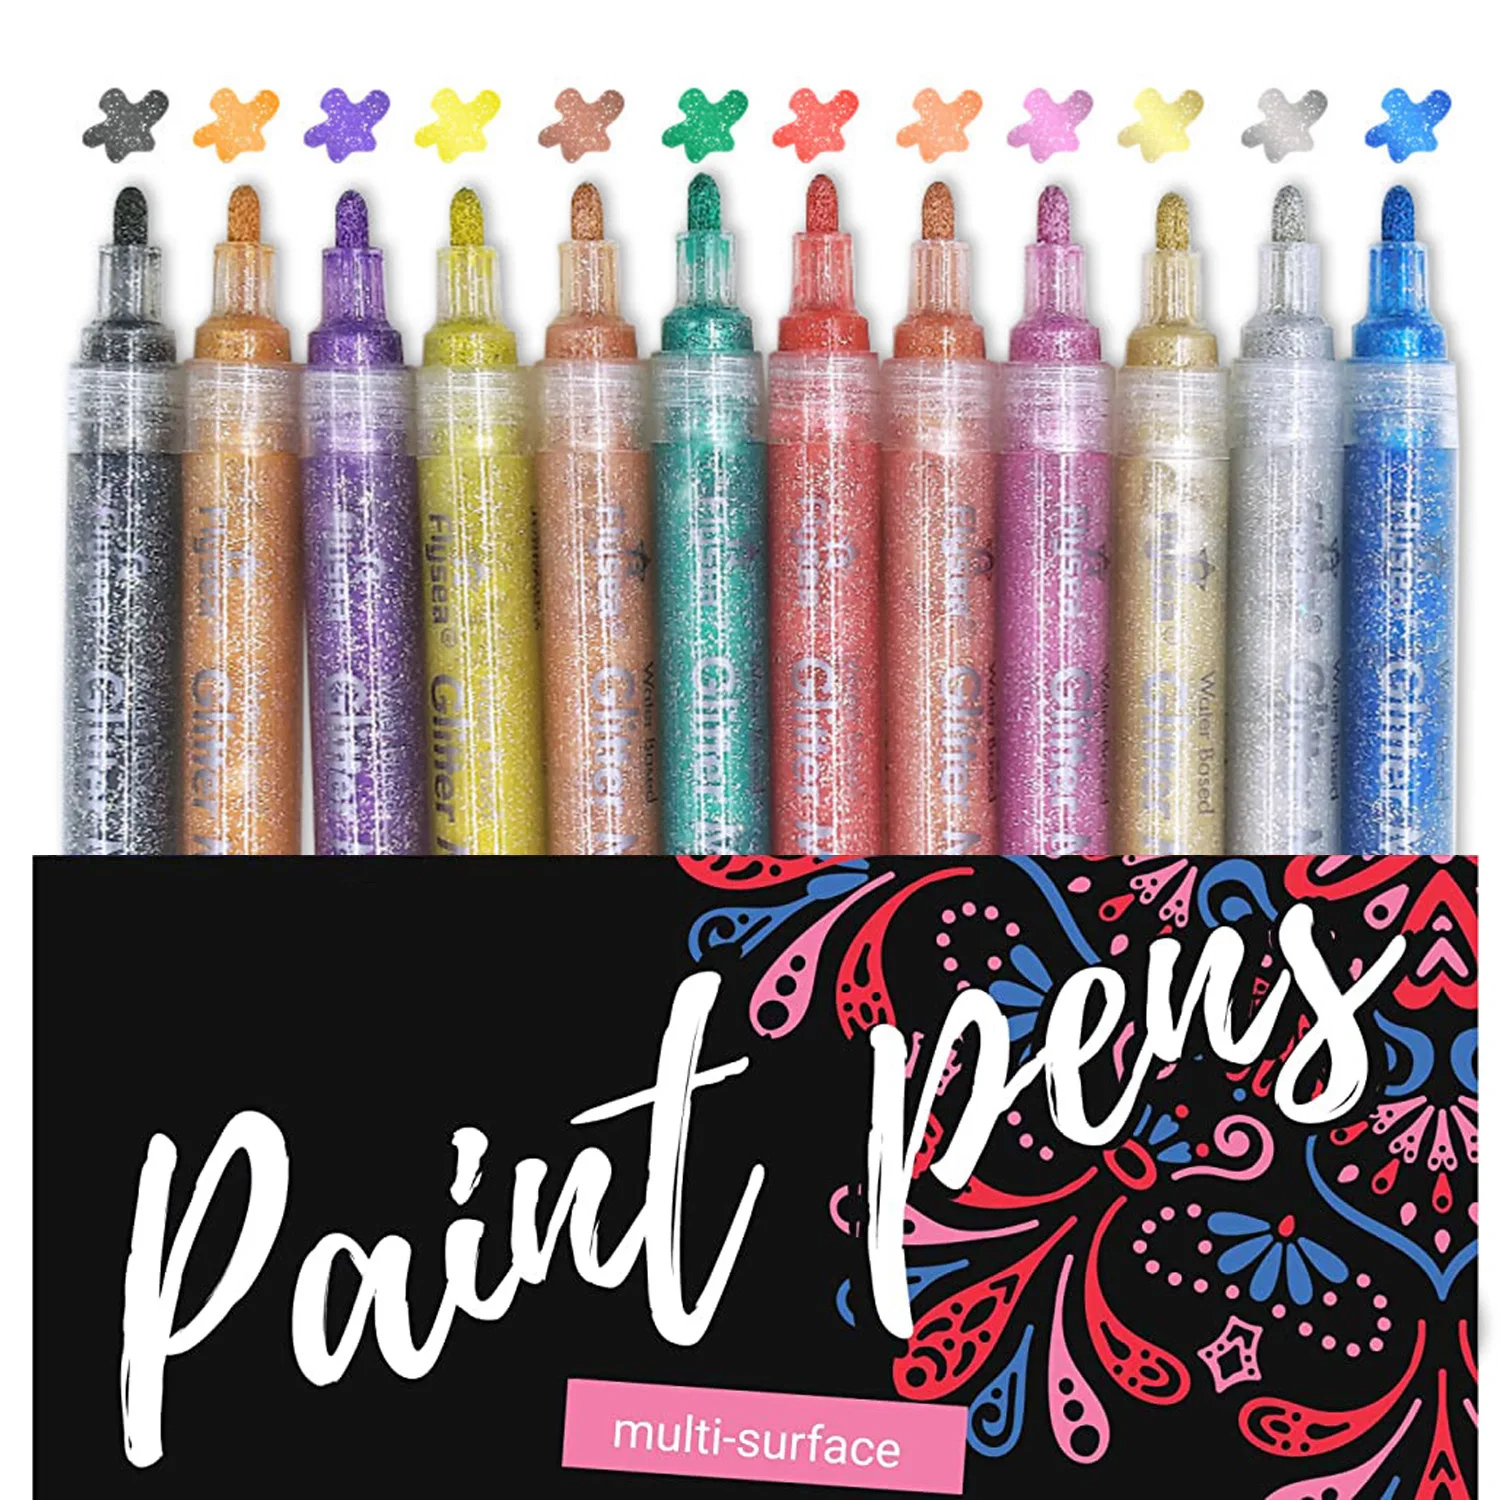 24 Acrylic Glitter Paint Pens 2 Packs of 12 Acrylic Paint Markers